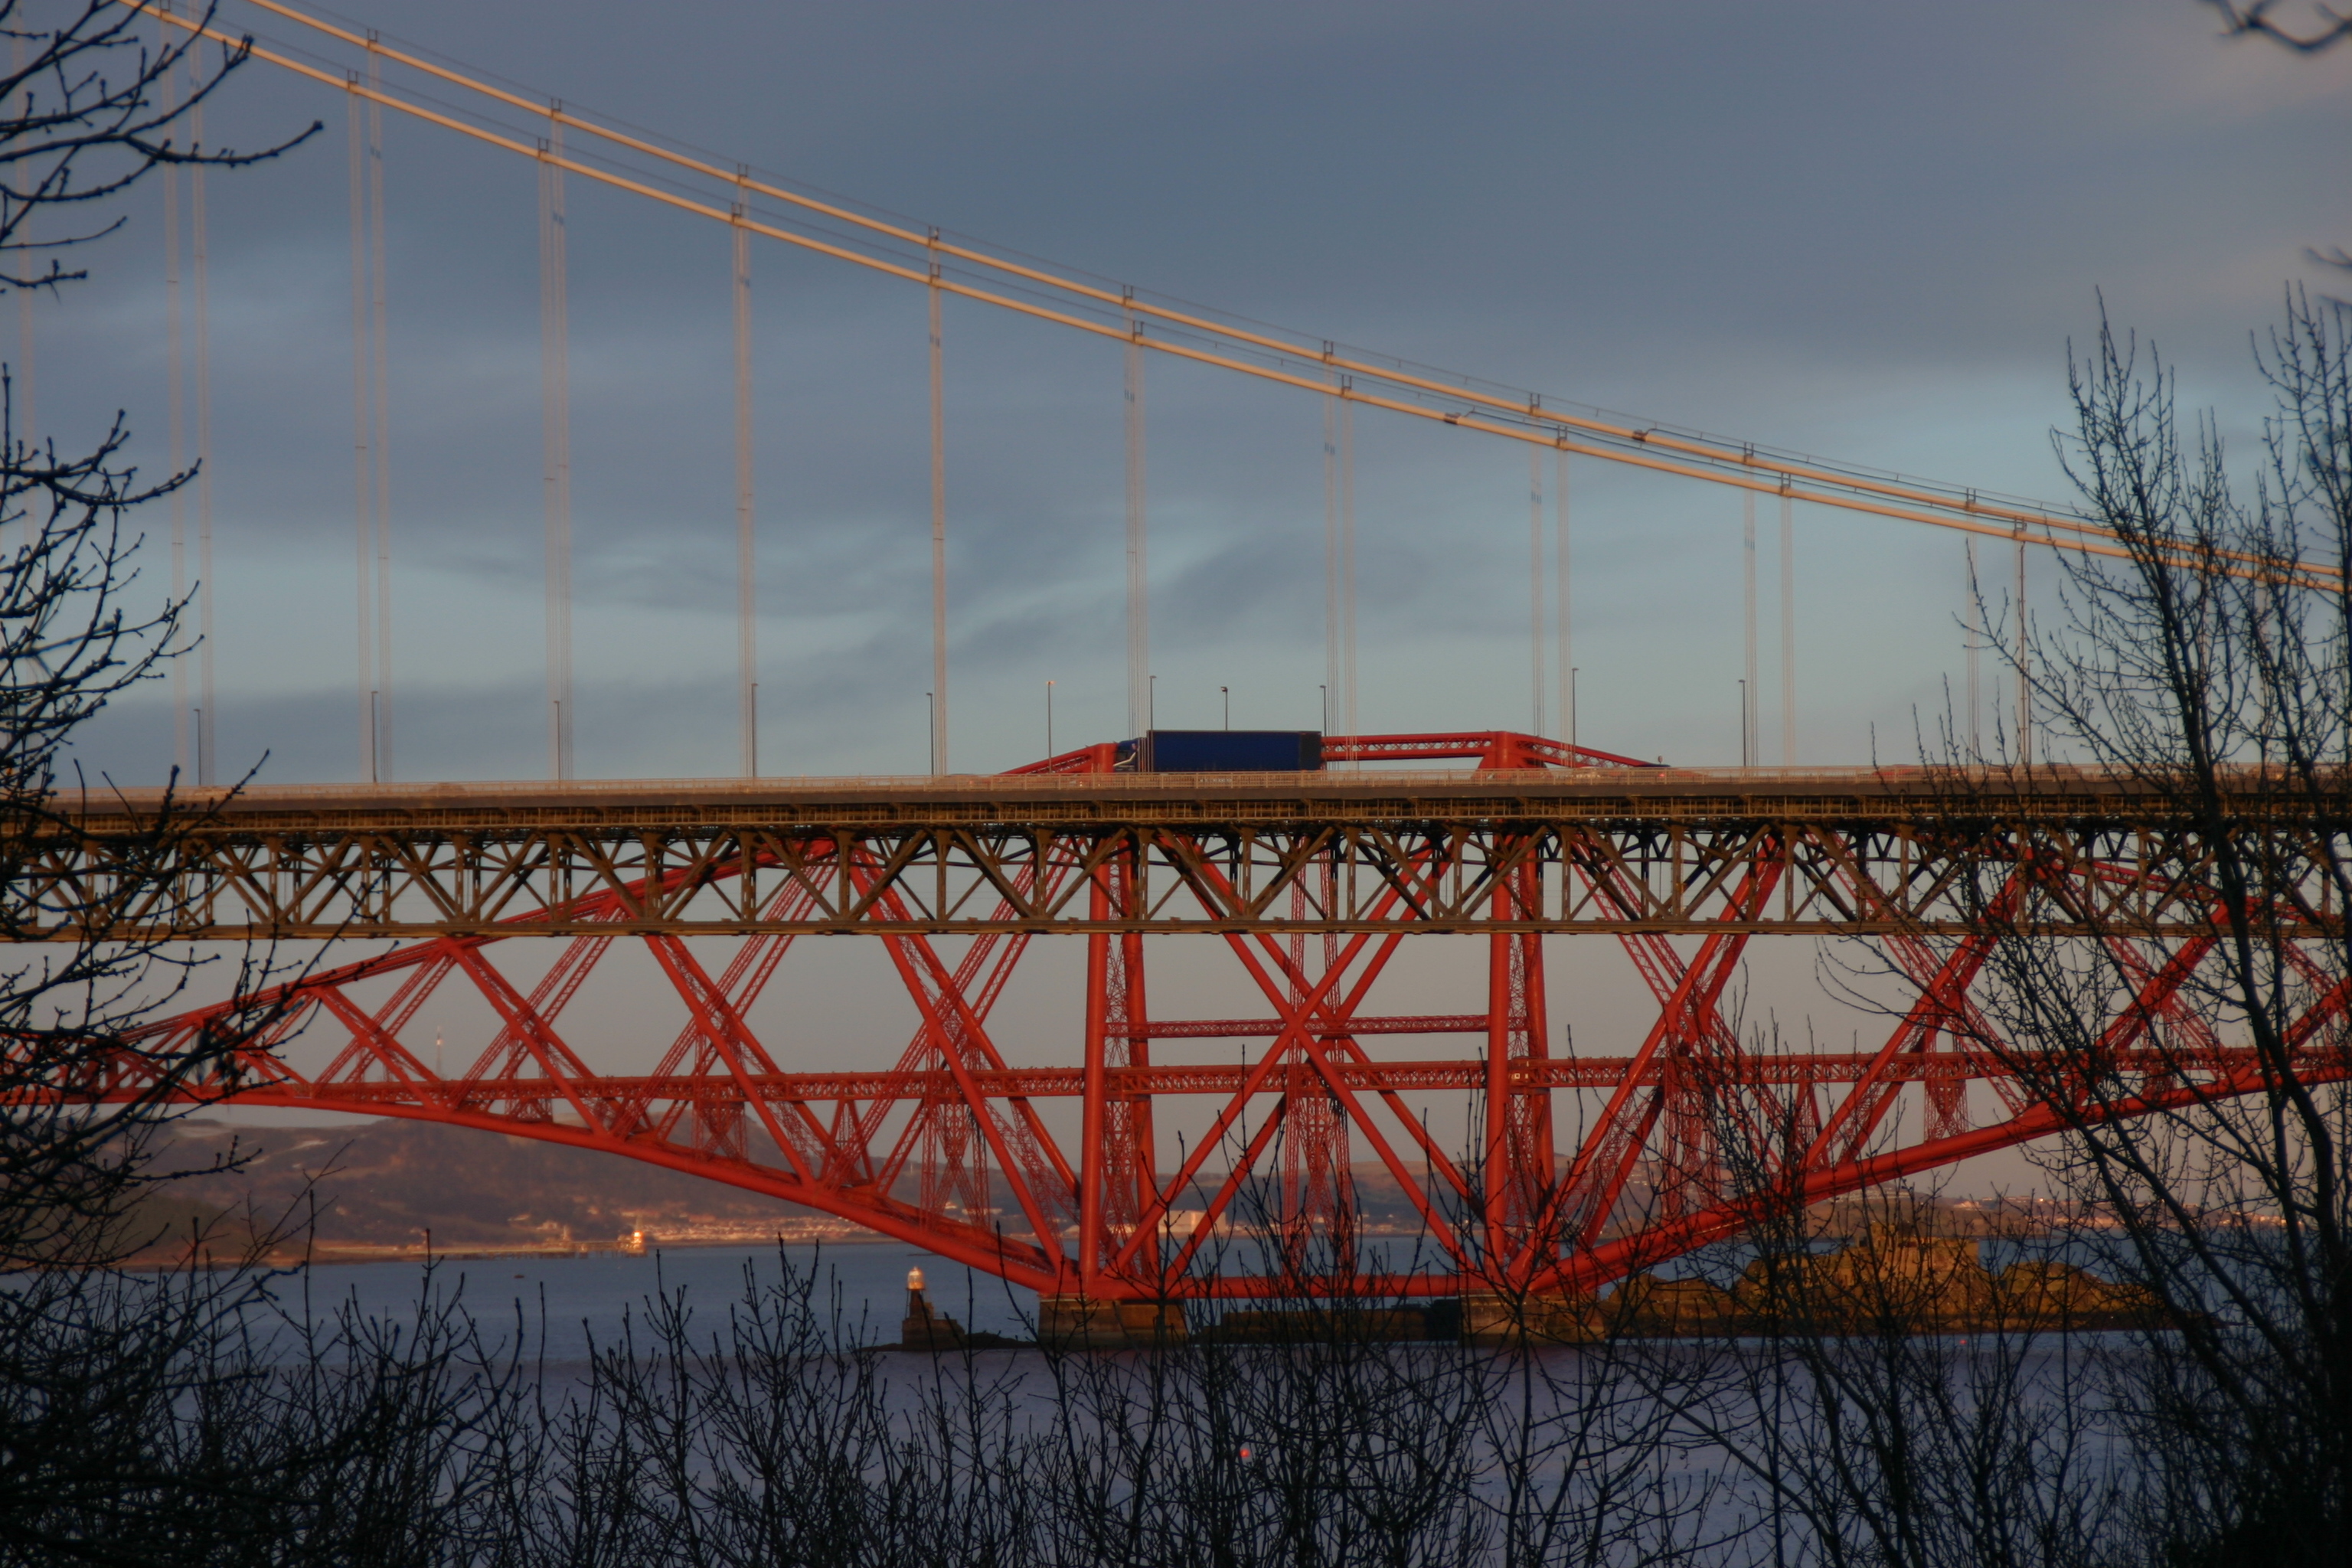 The Forth Bridge and Forth Road Bridge at South Queensferry, iconic sites indeed.